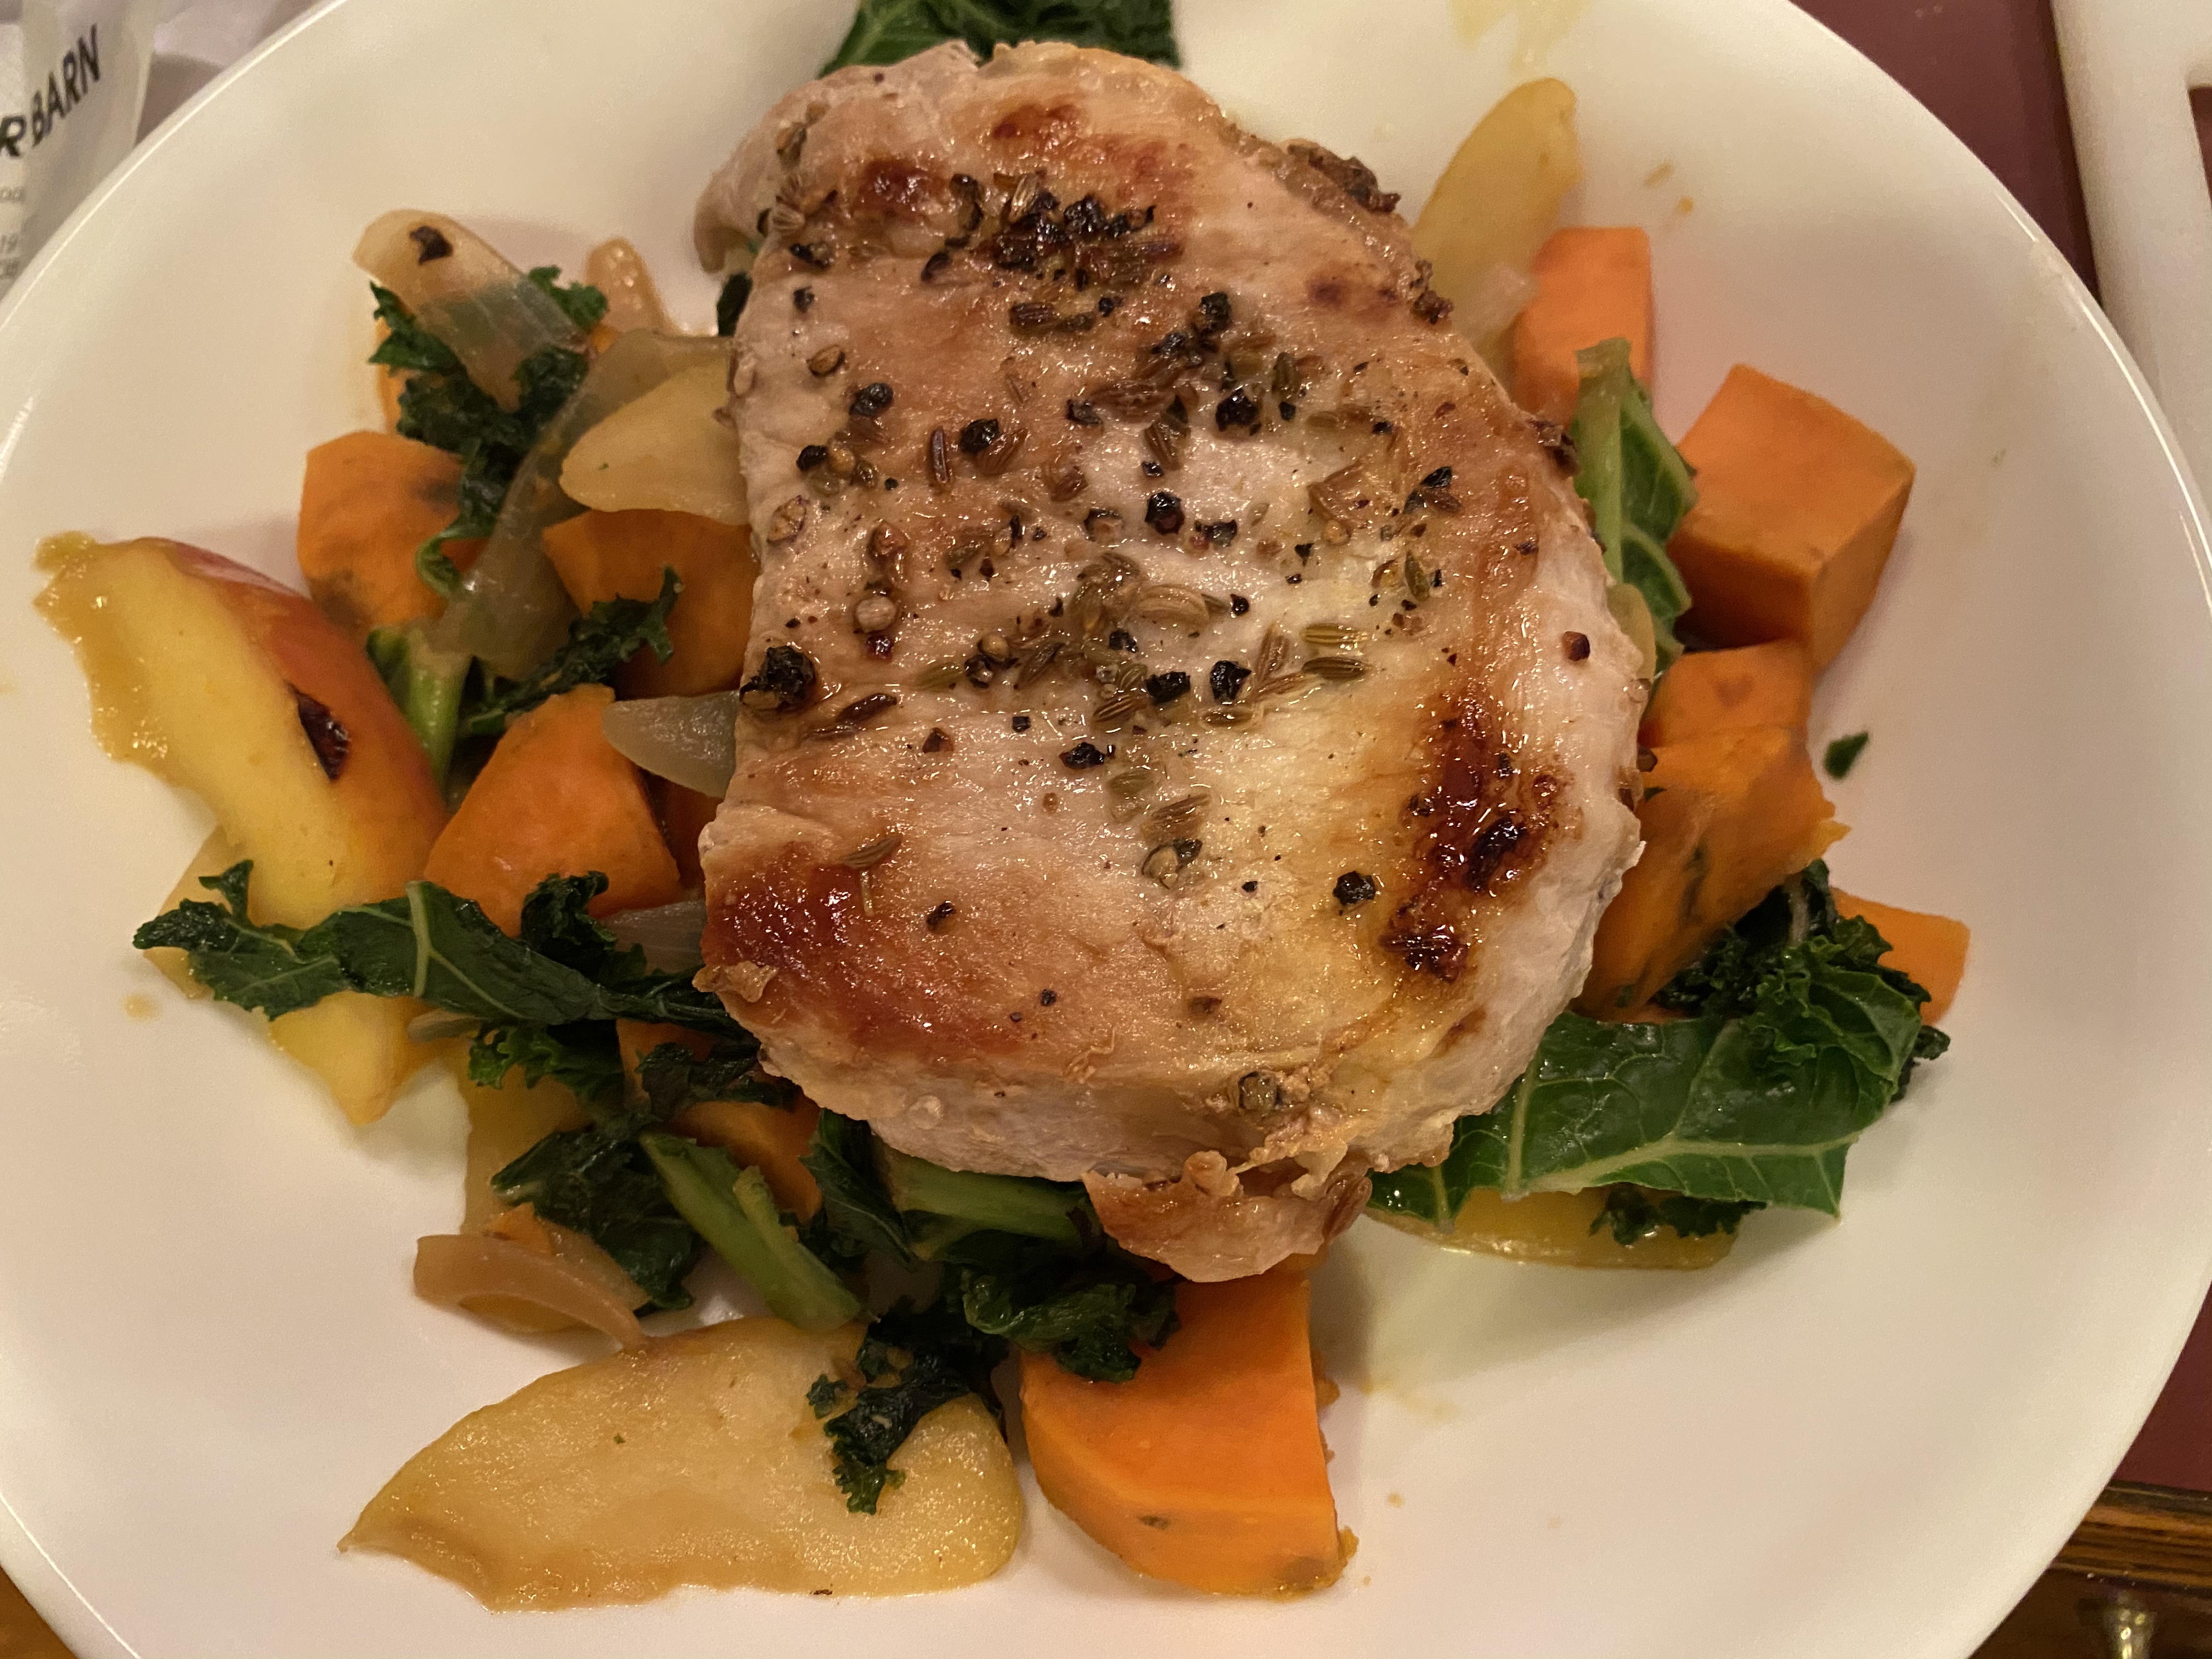 Fennel-Rubbed Pork Chops with Apple, Kale, and Sweet Potato KPThom924